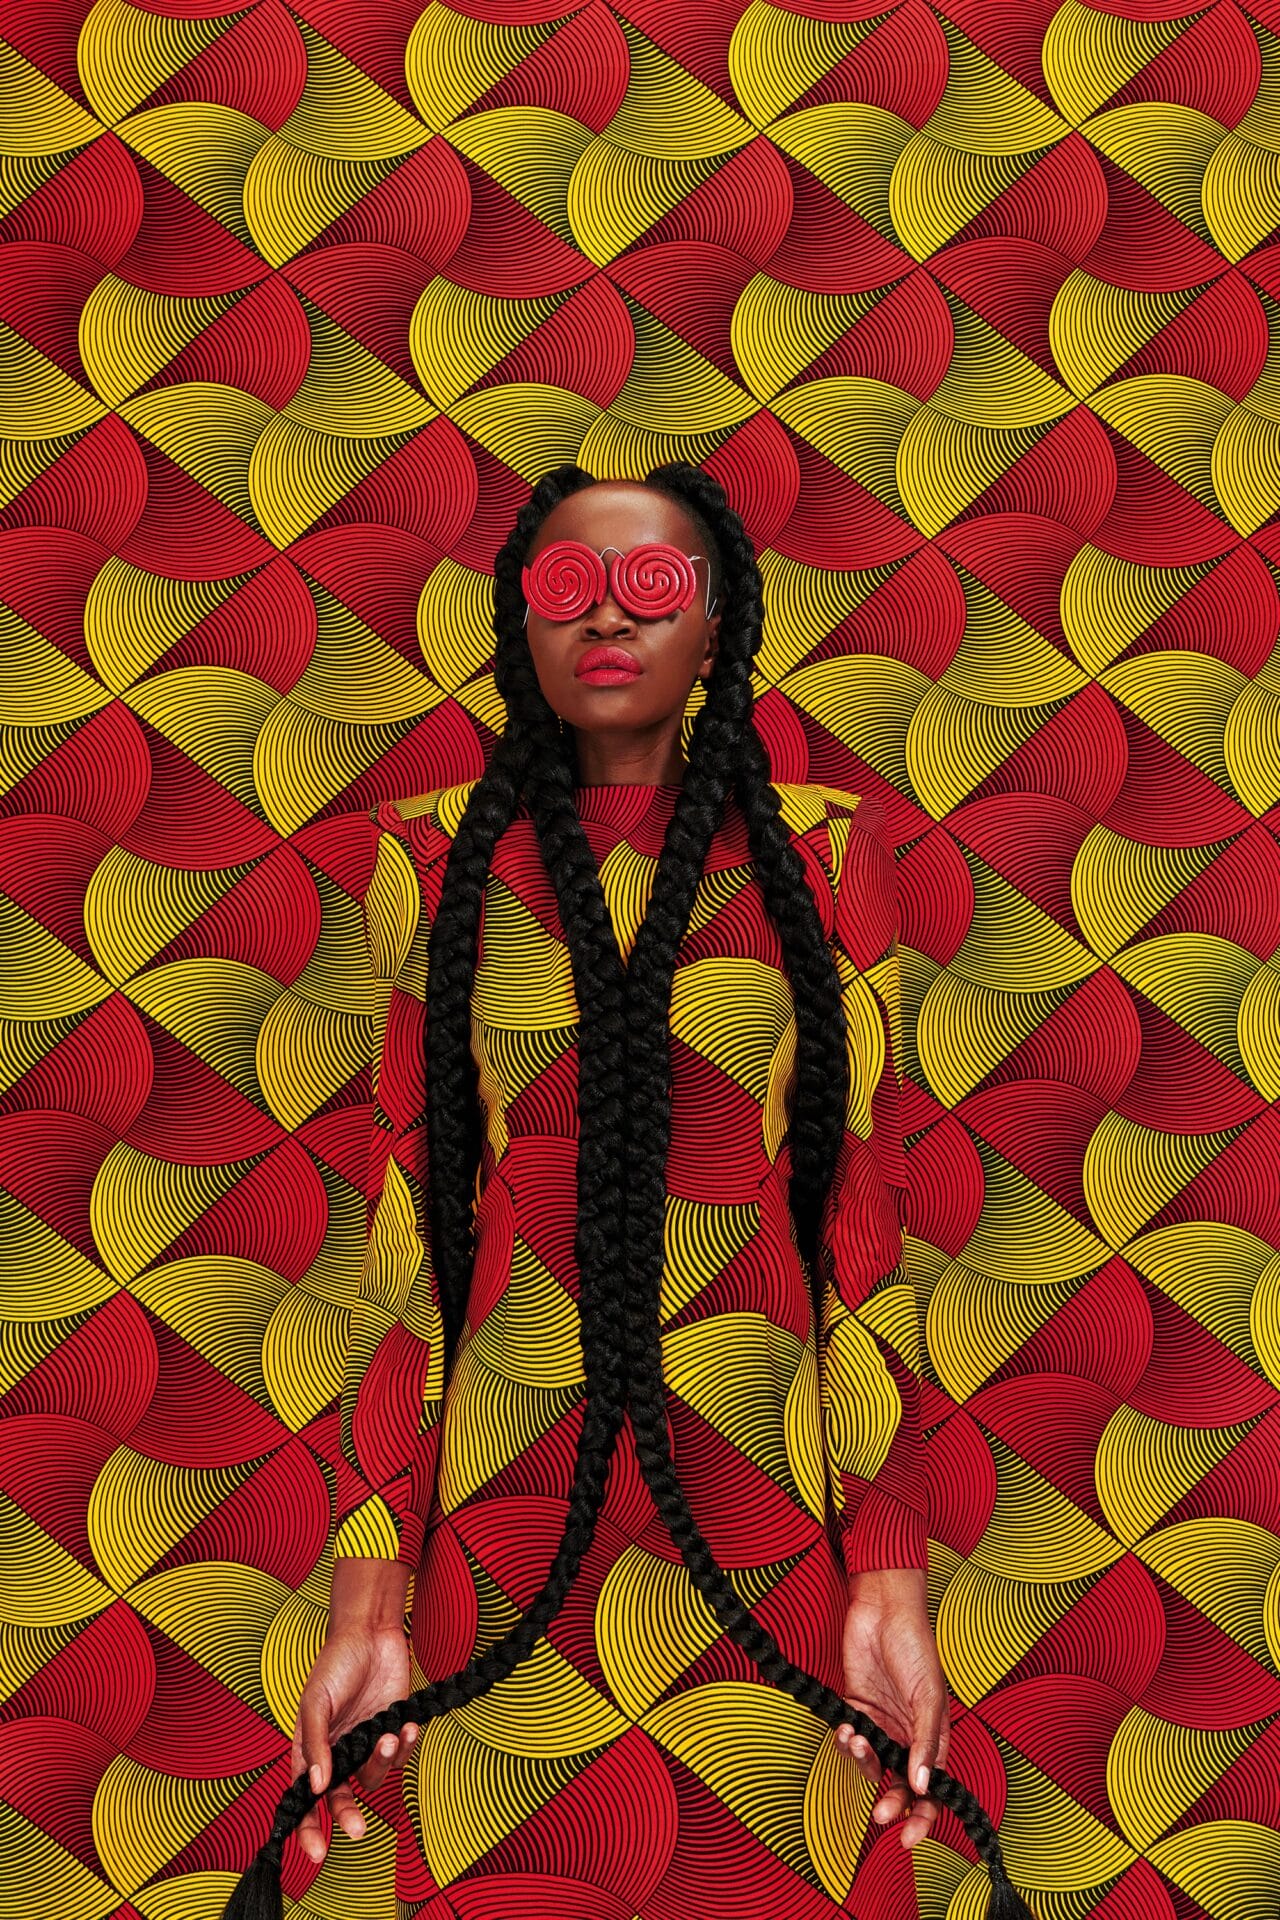 a portrait of the artist against a patterned red and yellow backdrop. she's wearing bright red eyewear